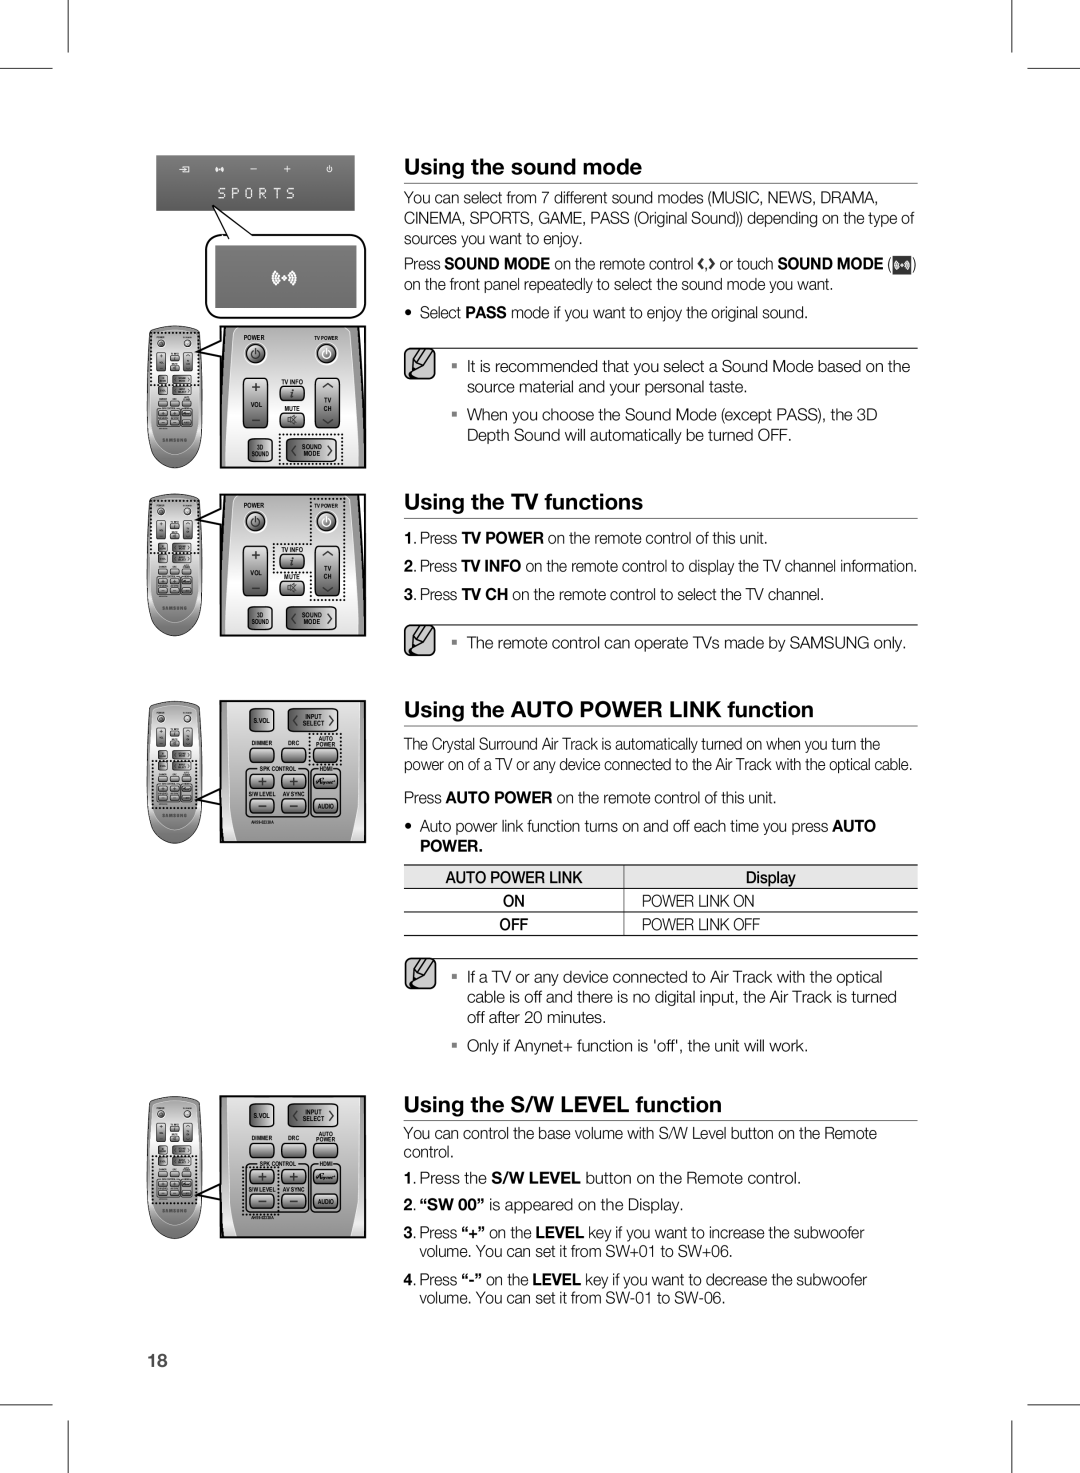 Samsung HW-D551, HW-D550 user manual Using the sound mode, Using the TV functions, Using the AUTO POWER LINK function, Power 